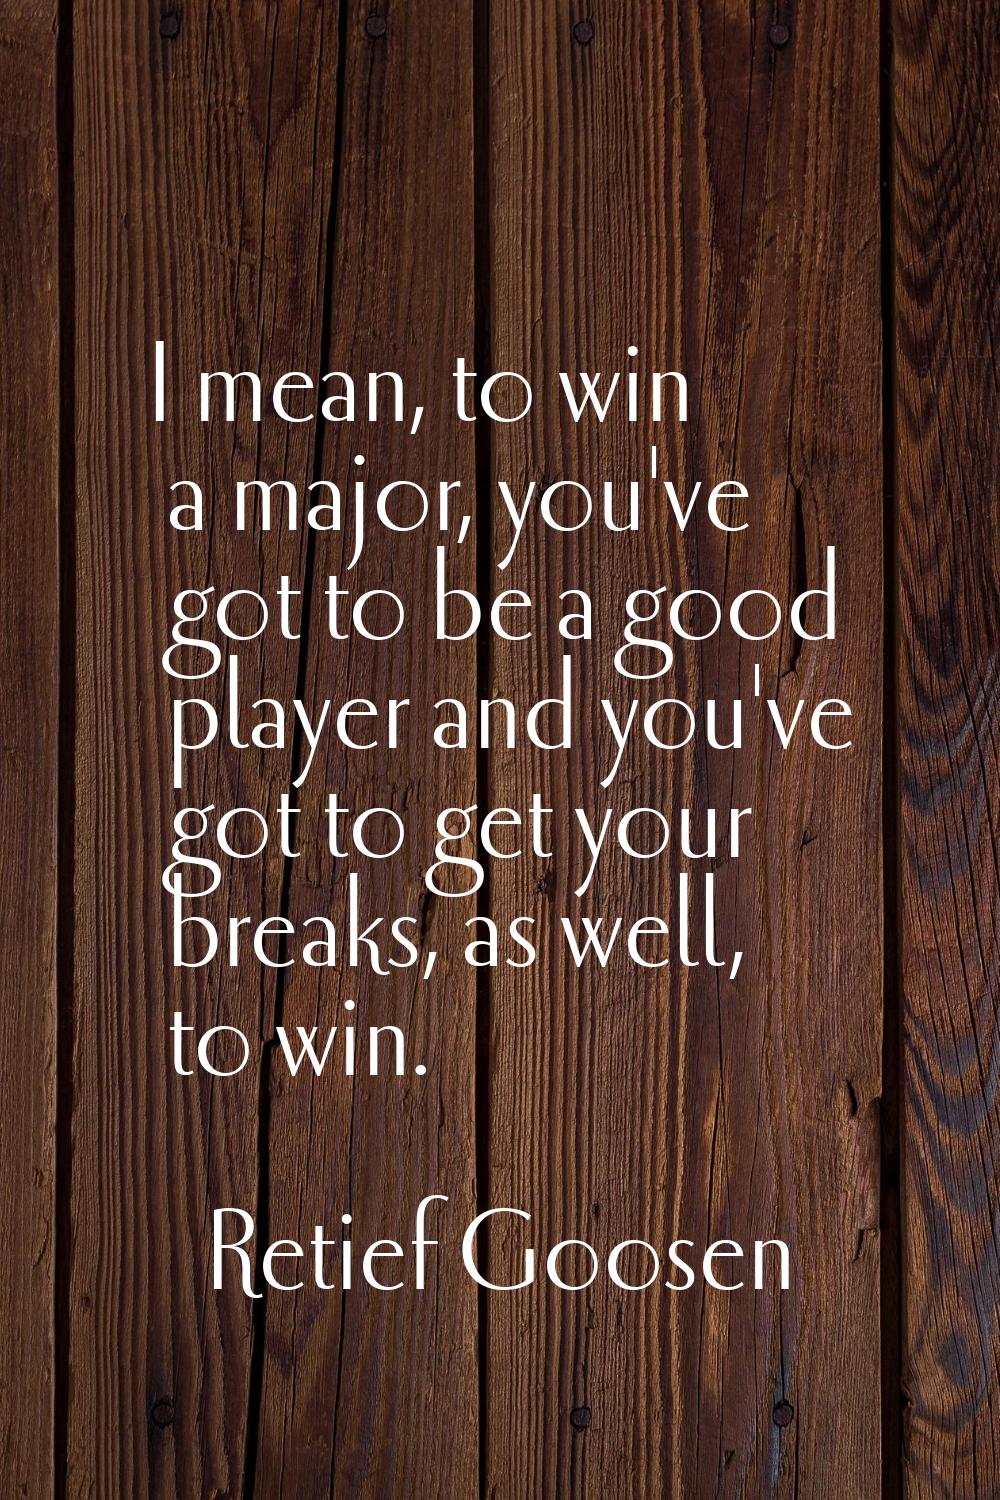 I mean, to win a major, you've got to be a good player and you've got to get your breaks, as well, 